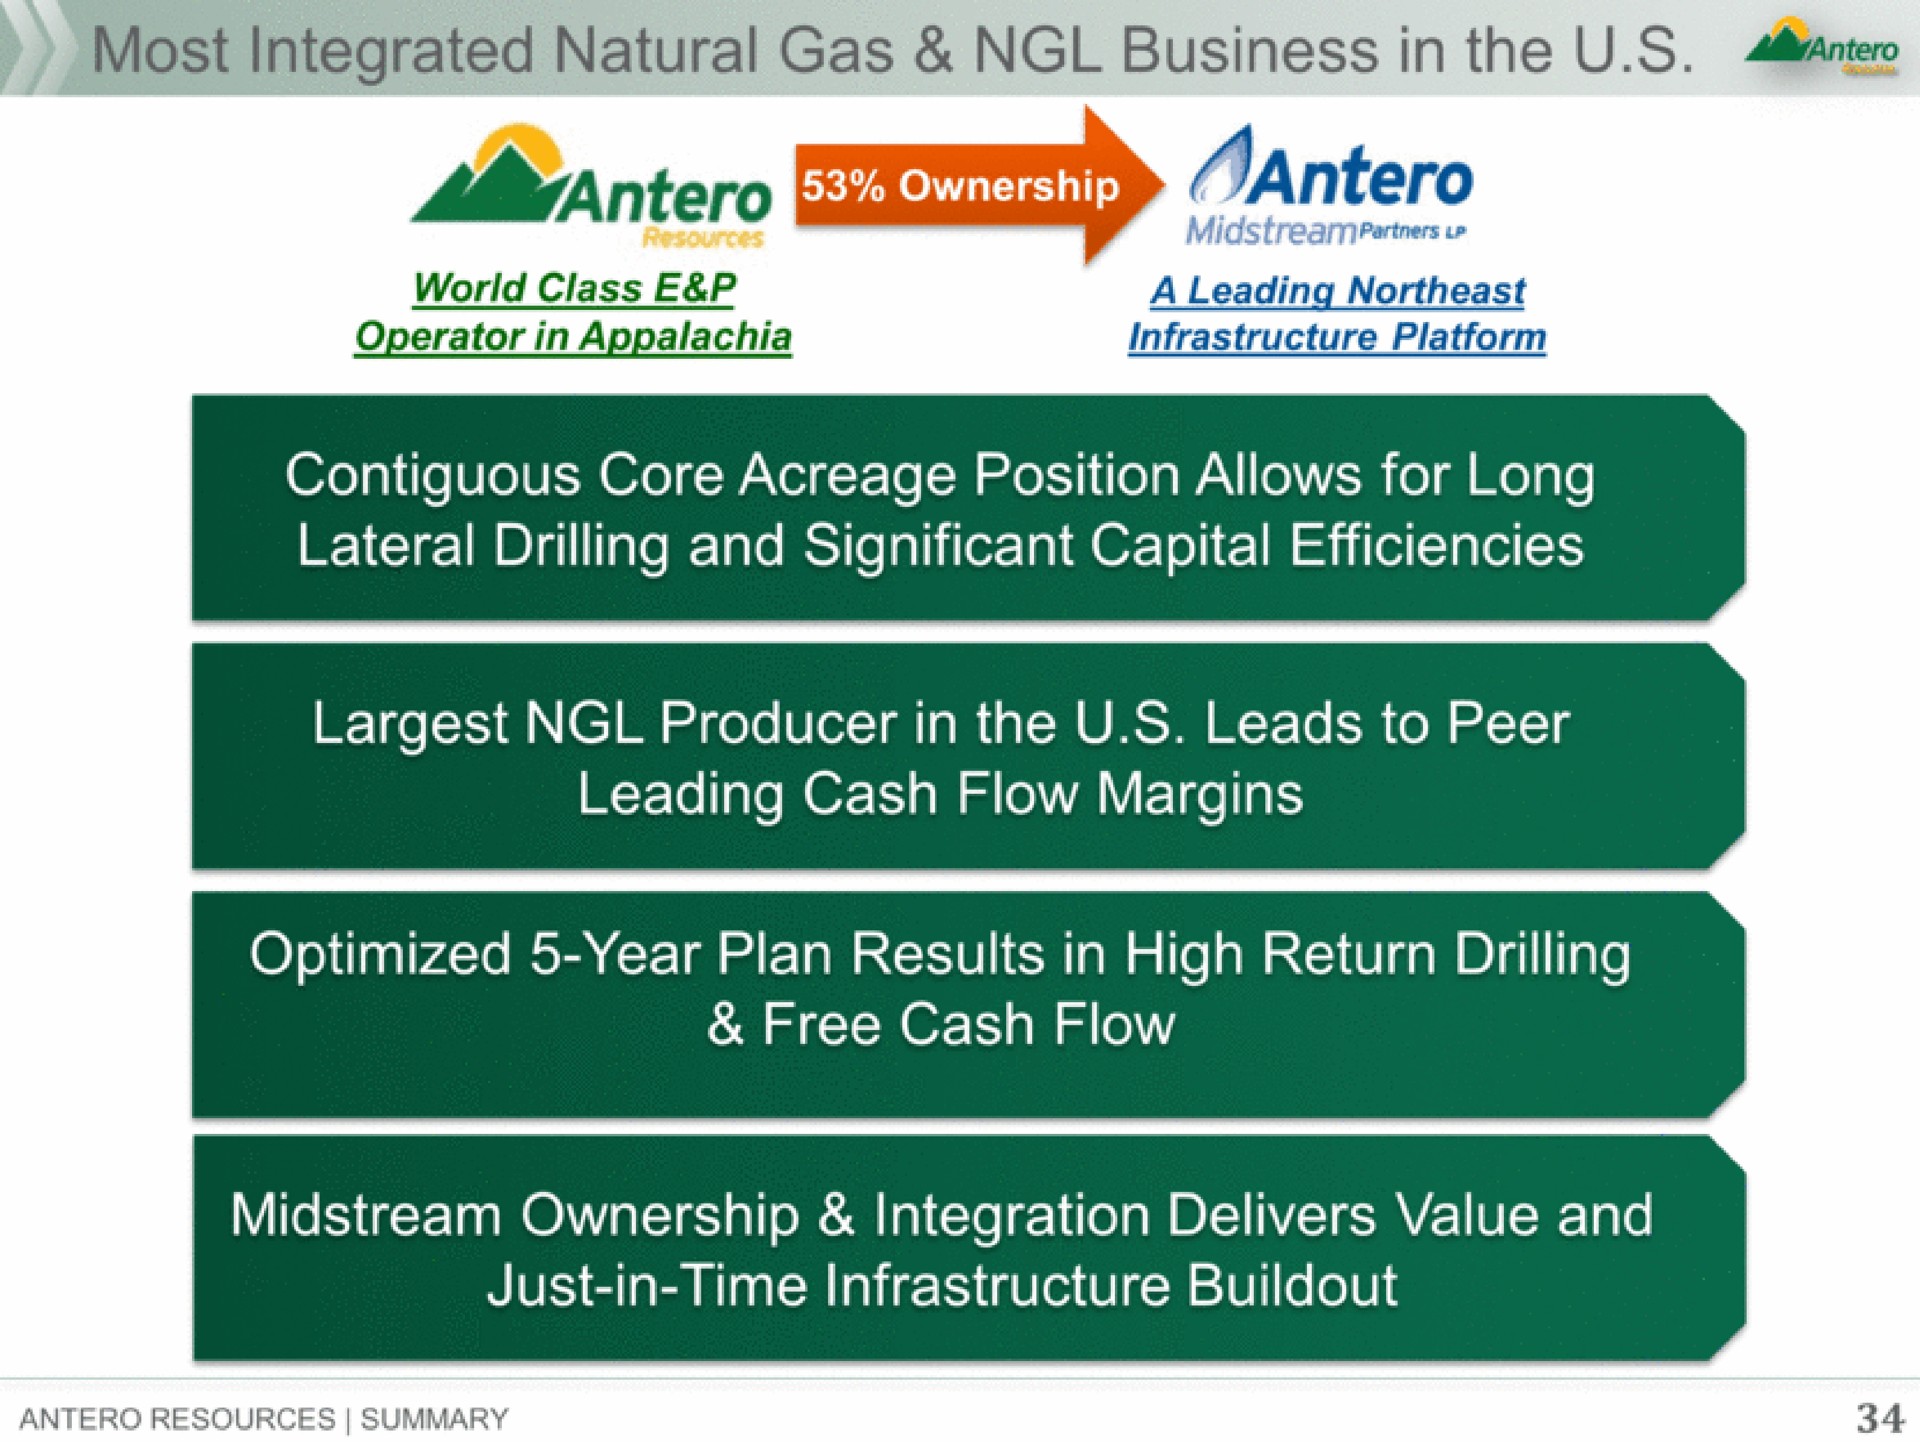 most integrated natural gas business in the contiguous core acreage position allows for long lateral drilling and significant capital efficiencies producer in the leads to peer leading cash flow margins optimized year plan results in high return drilling free cash flow just in time infrastructure resources midstream ownership integration delivers value and | Antero Midstream Partners